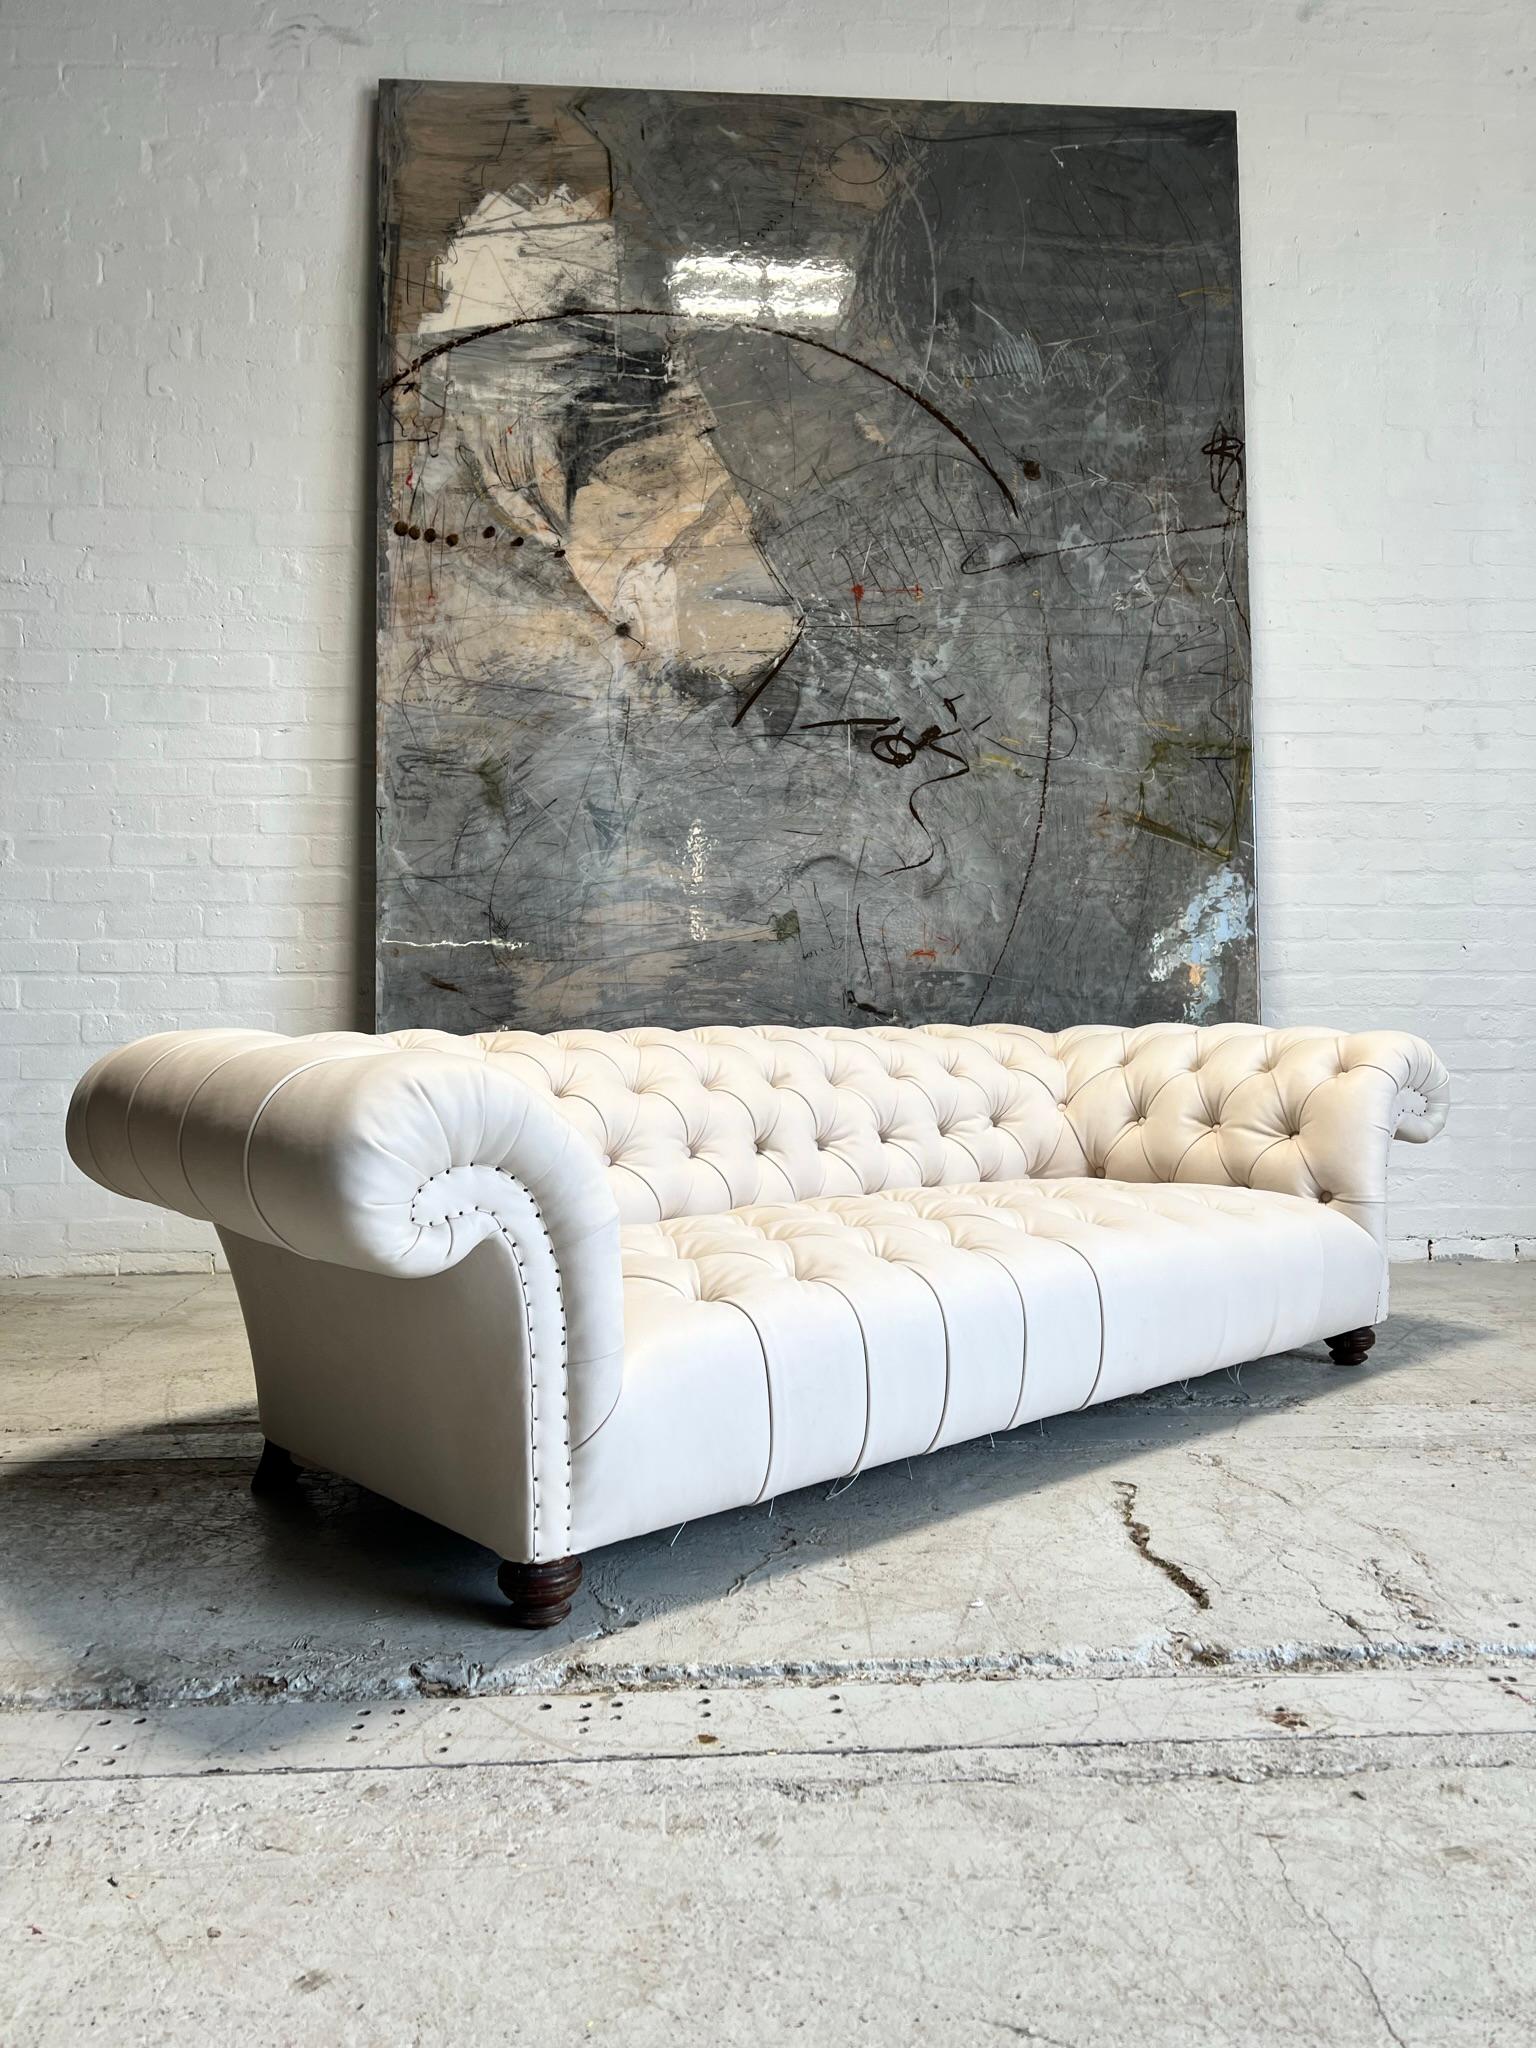 As a LAPADA dealer and furniture maker, I always have a very good selection of pieces in stock with a wide range of price points.

Original Howard & Sons 19thC Chesterfield sofa that we have fully restored in our hand dyed British leathers, fully